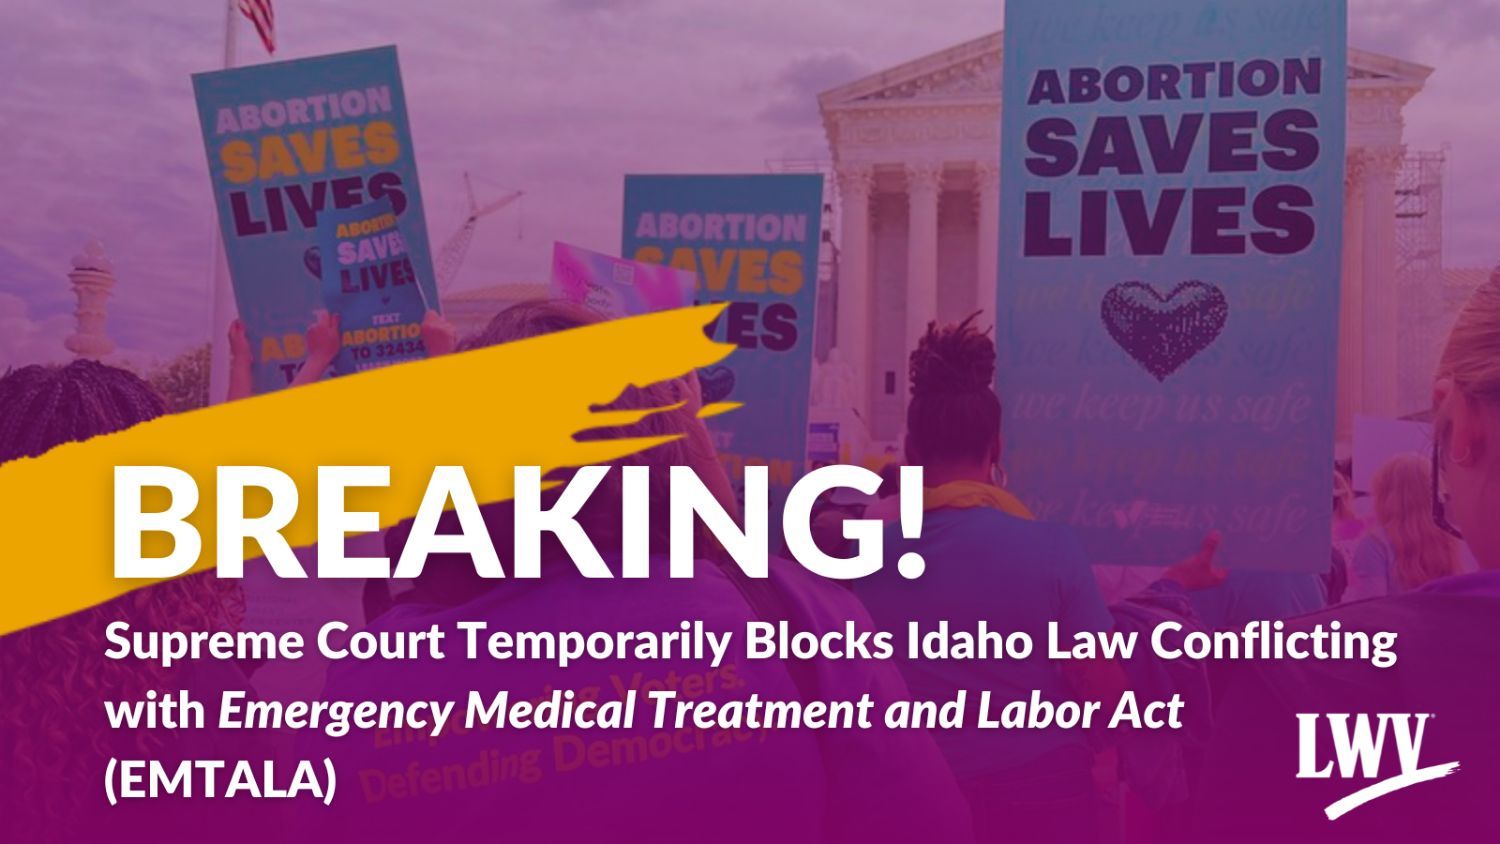 Breaking! LWV Responds to Supreme Court Decision Temporarily Blocking Idaho Law Conflicting with Emergency Medical Treatment and Labor Act (EMTALA)